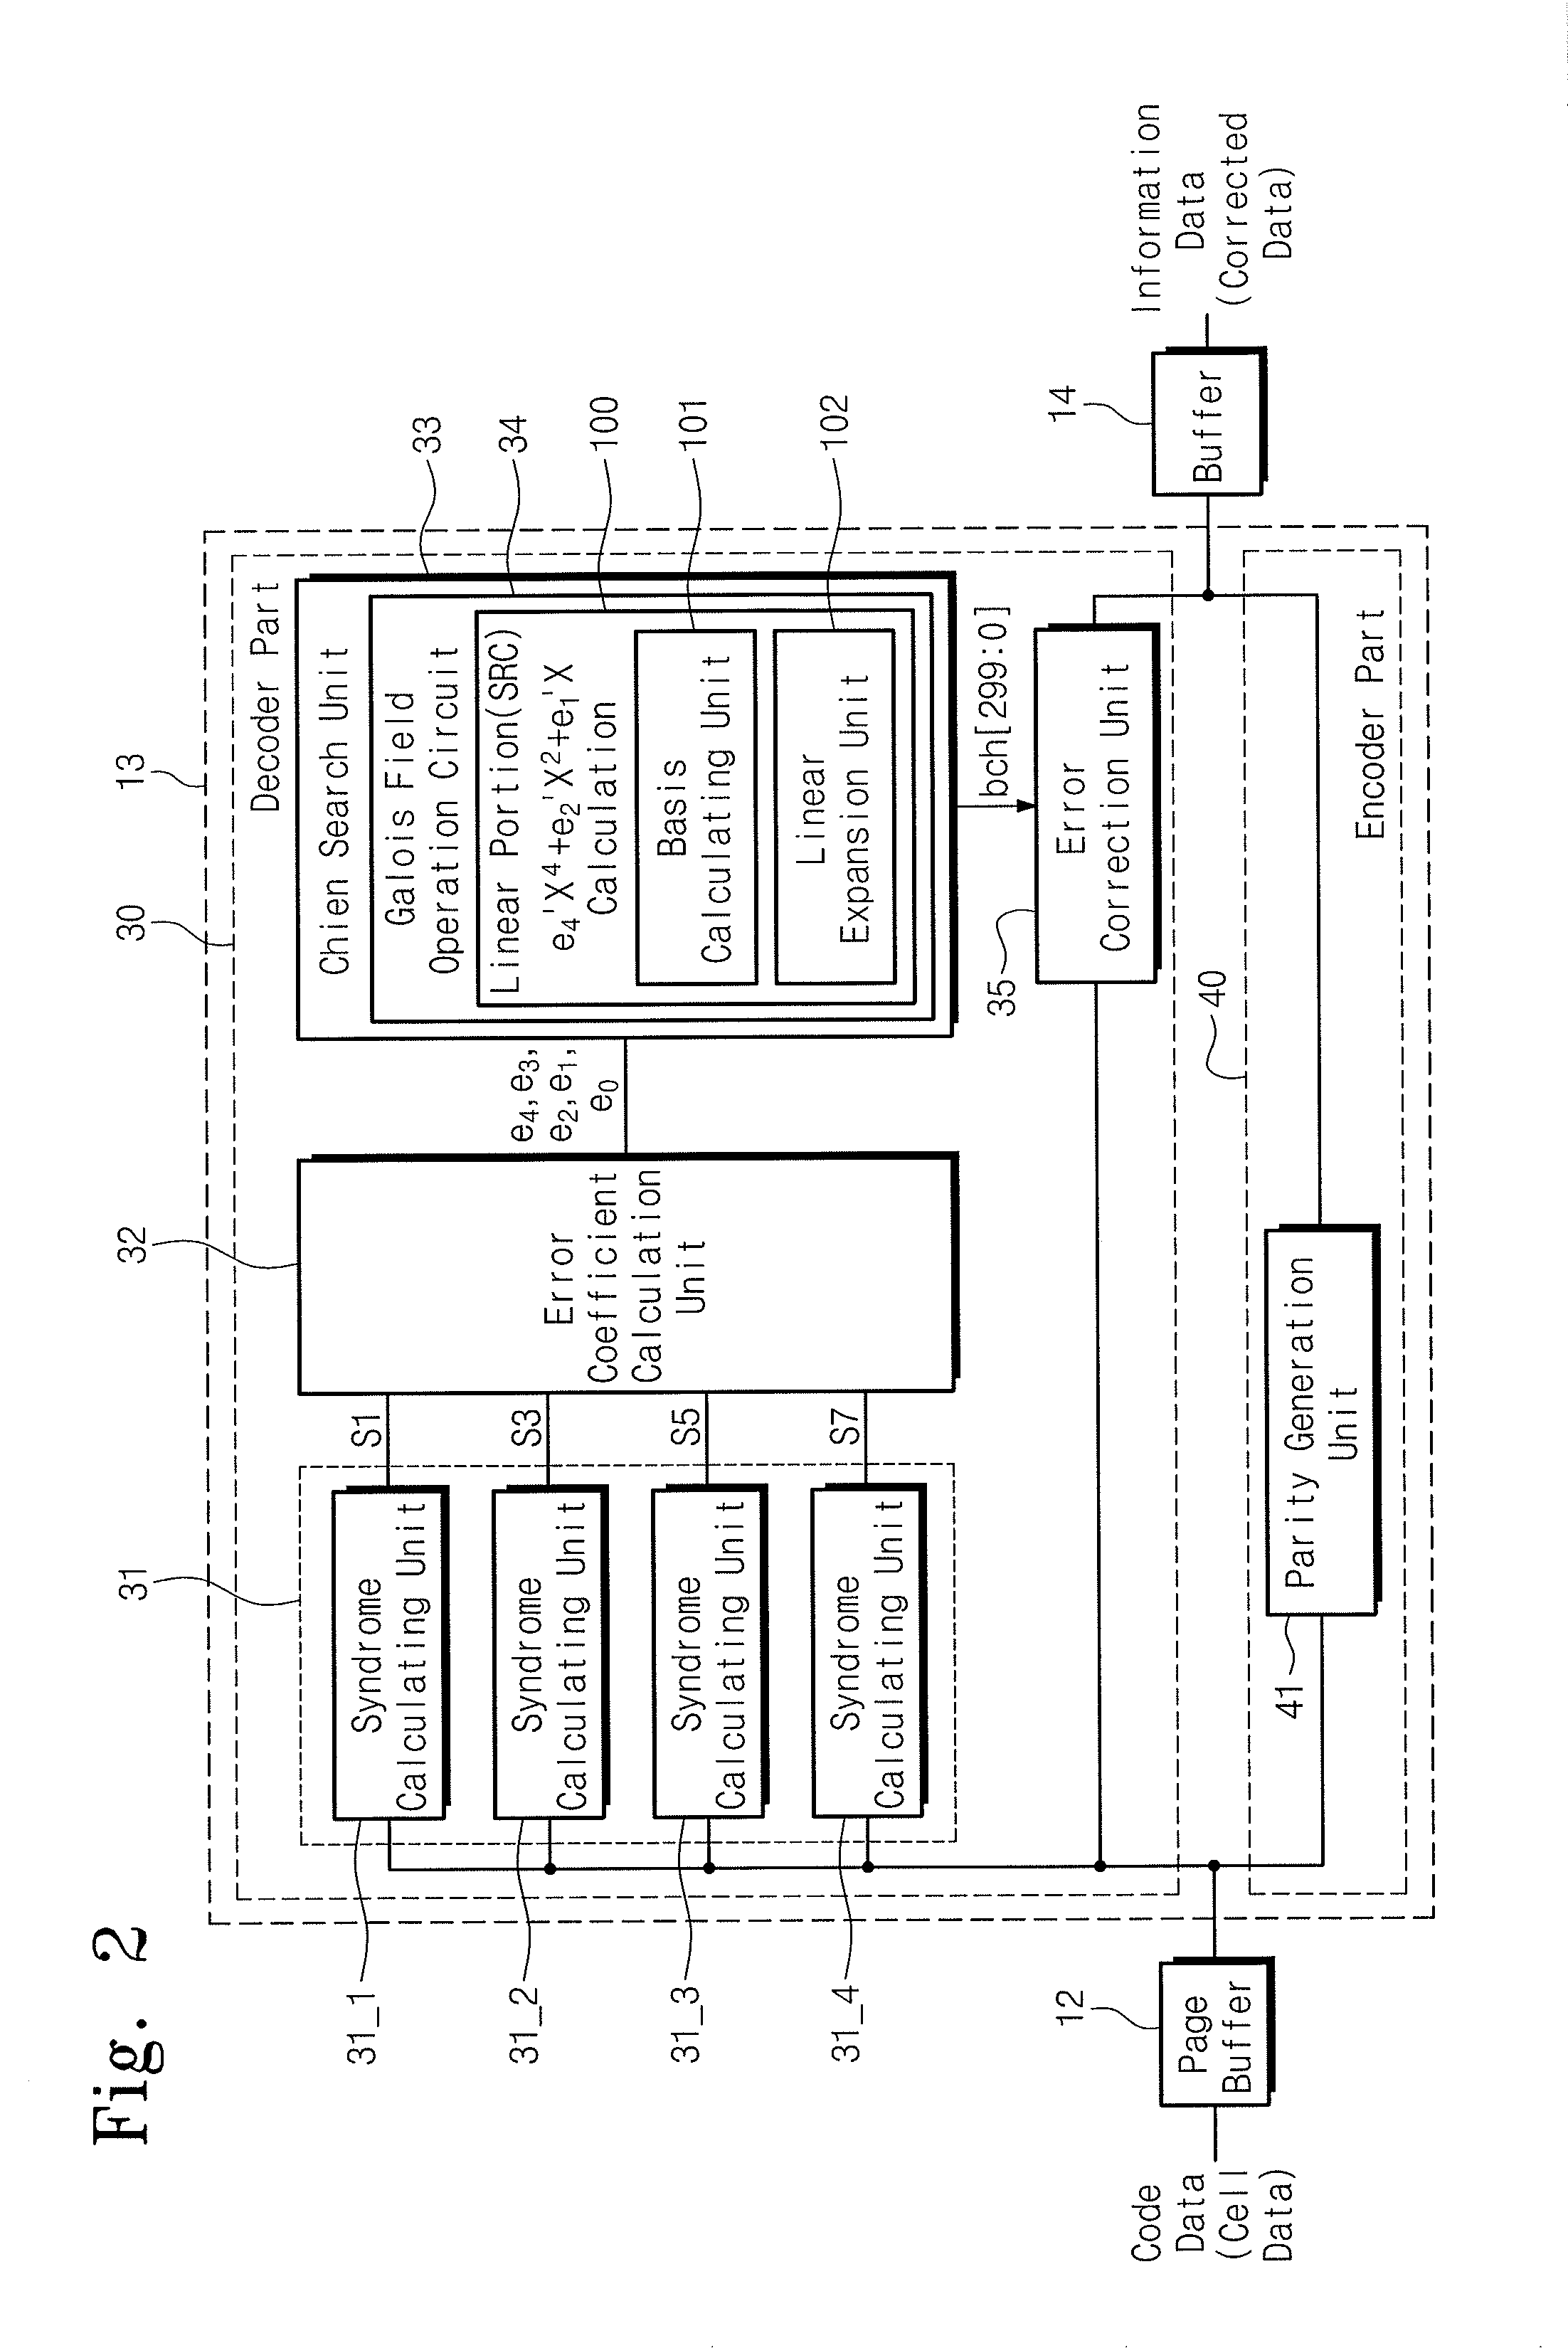 Error correction code circuit and memory device including the same